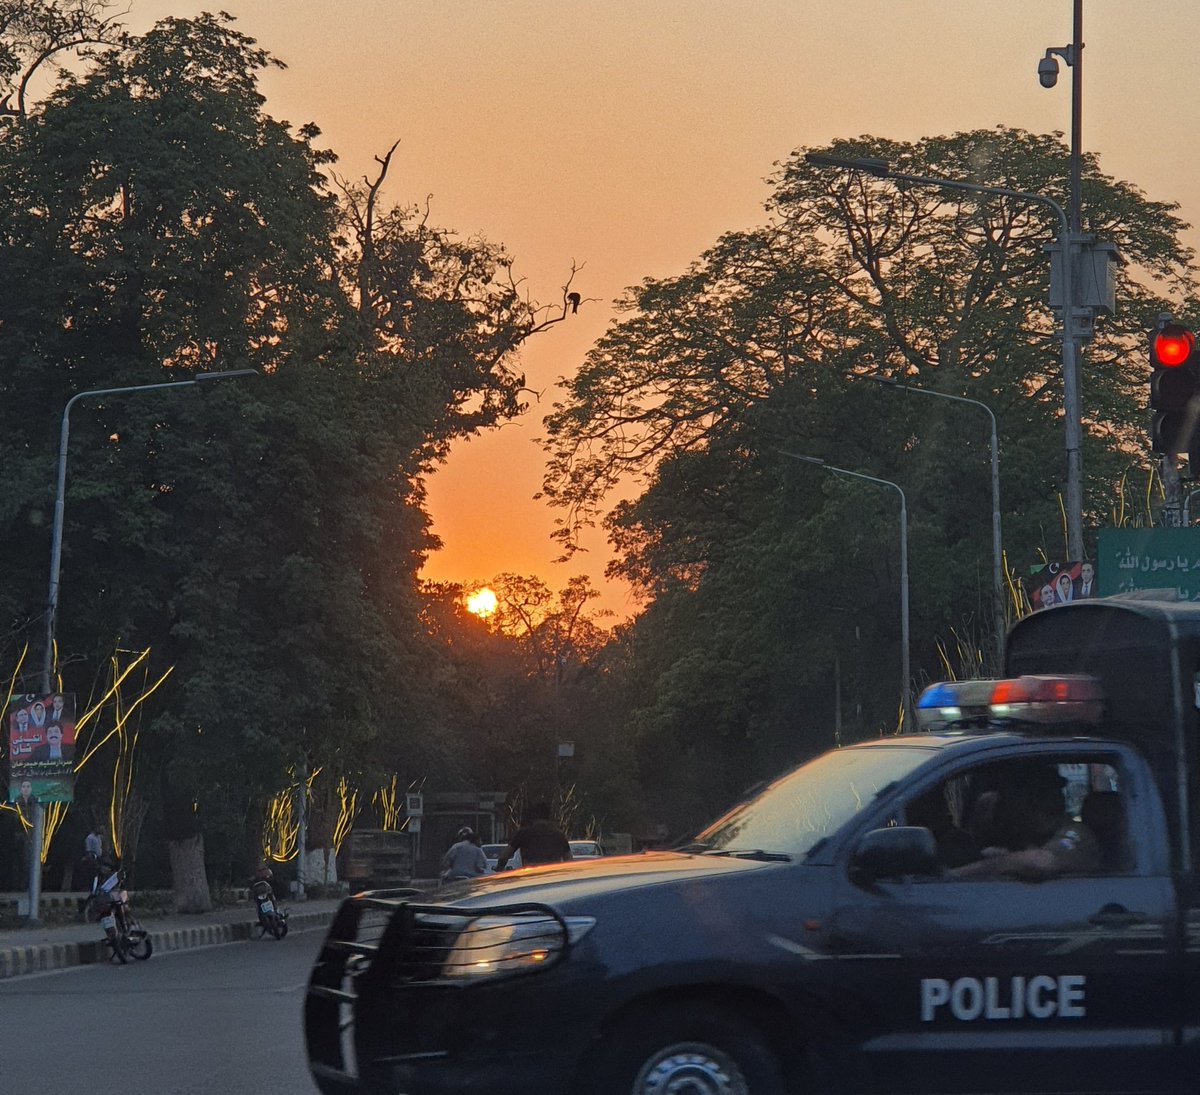 The setting sun in Lahore 😍